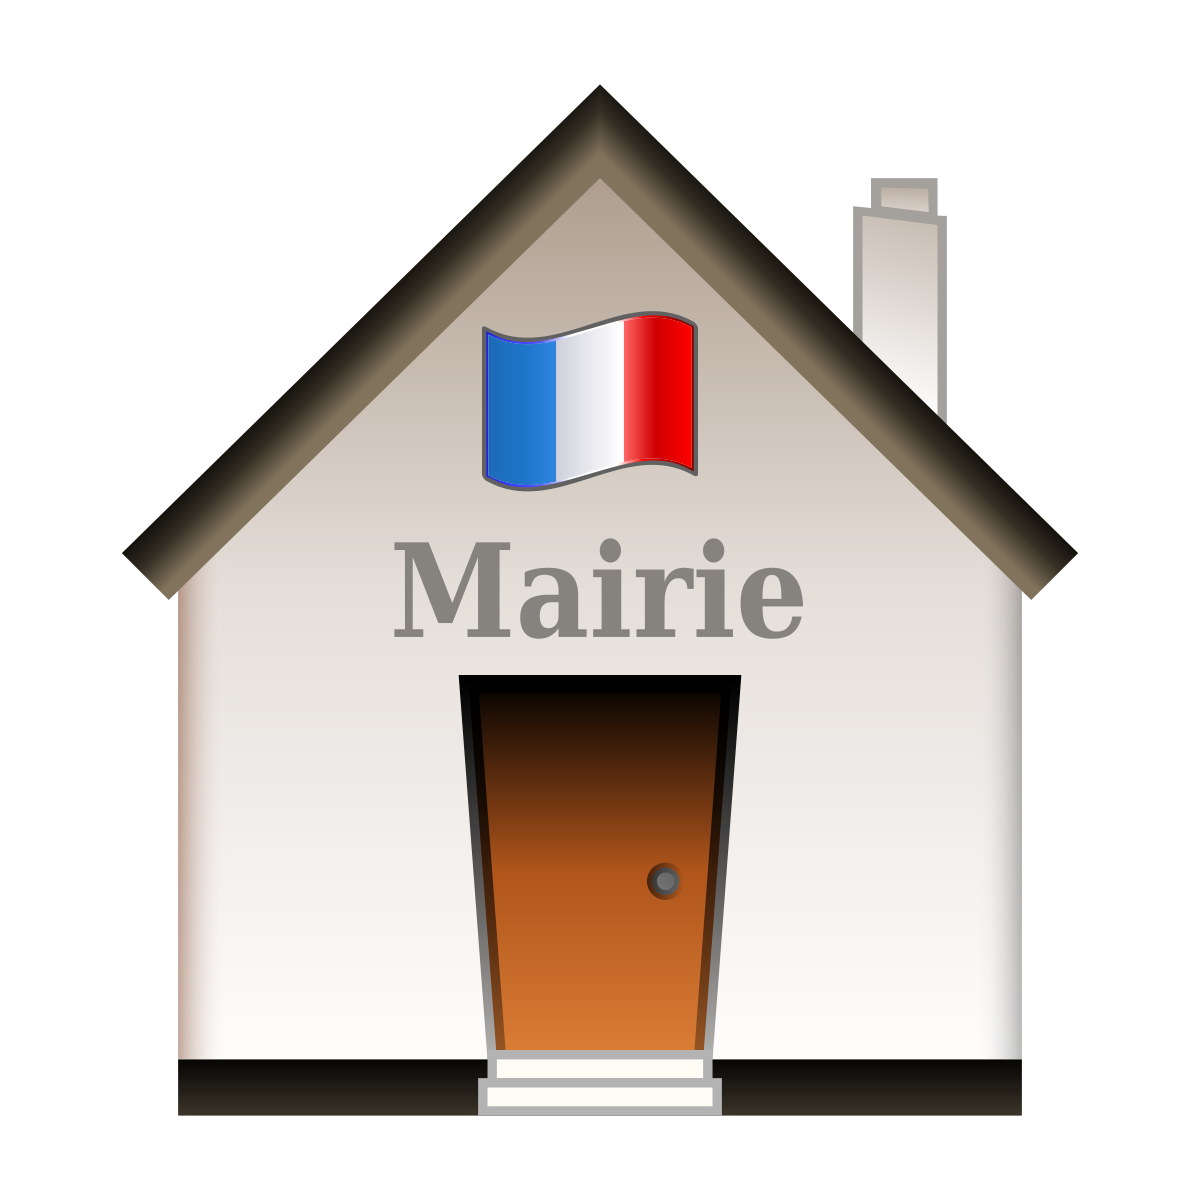 http://www.ligue-bretagne-surf.bzh/wp-content/uploads/2020/05/1200px-Logo-Mairie.svg_.png